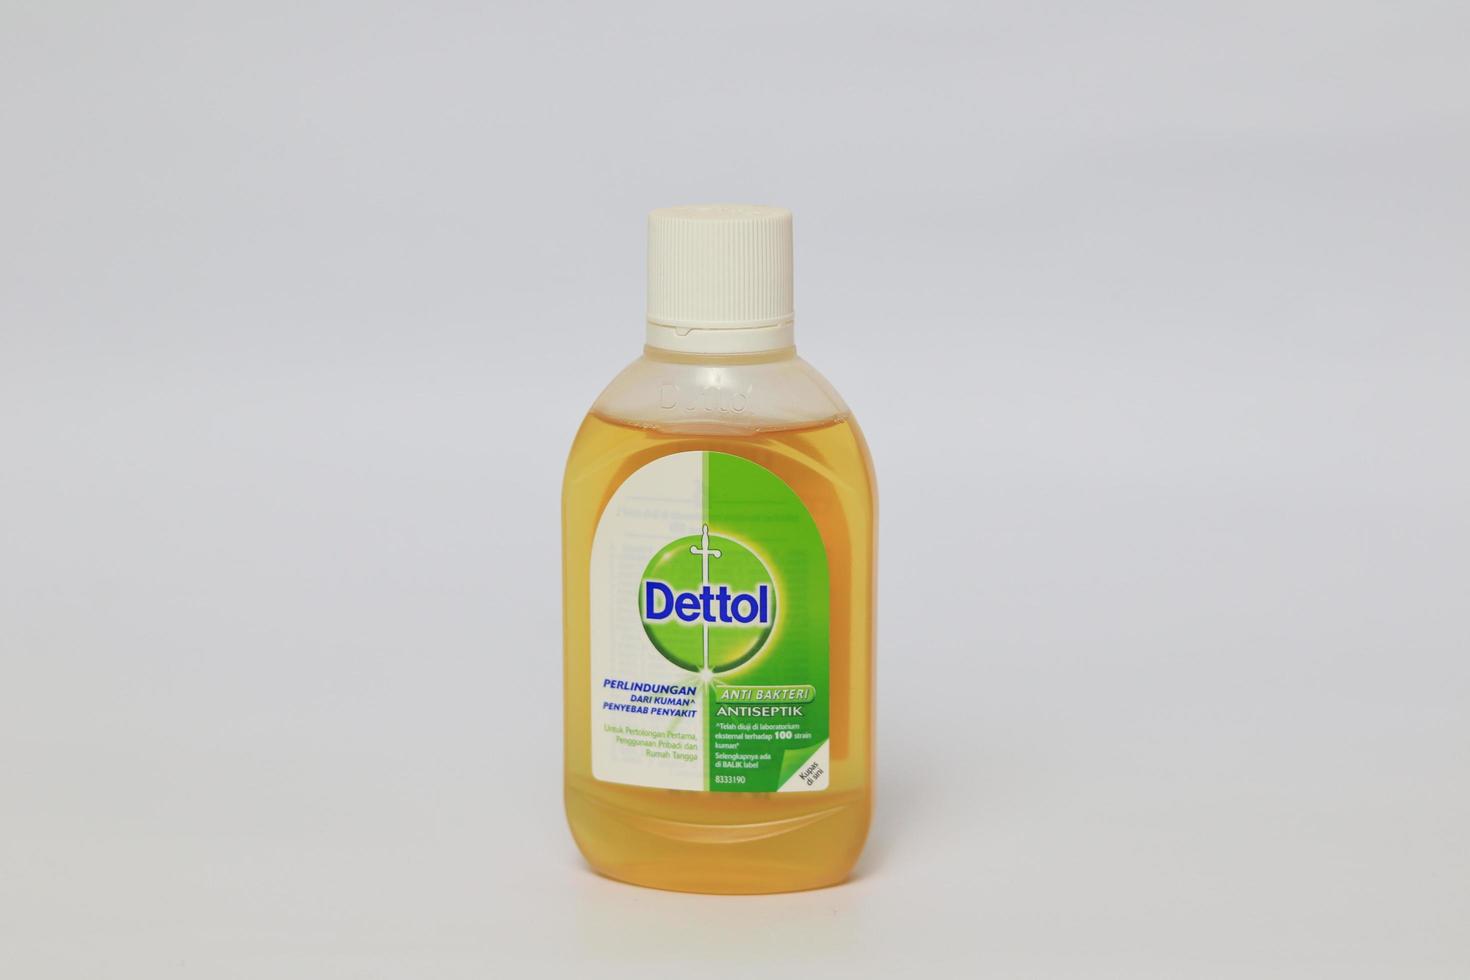 Lampung Selatan , Indonesia, 06 March 2023, Dettol Antibacterial Disinfectant isolated on white background. photo